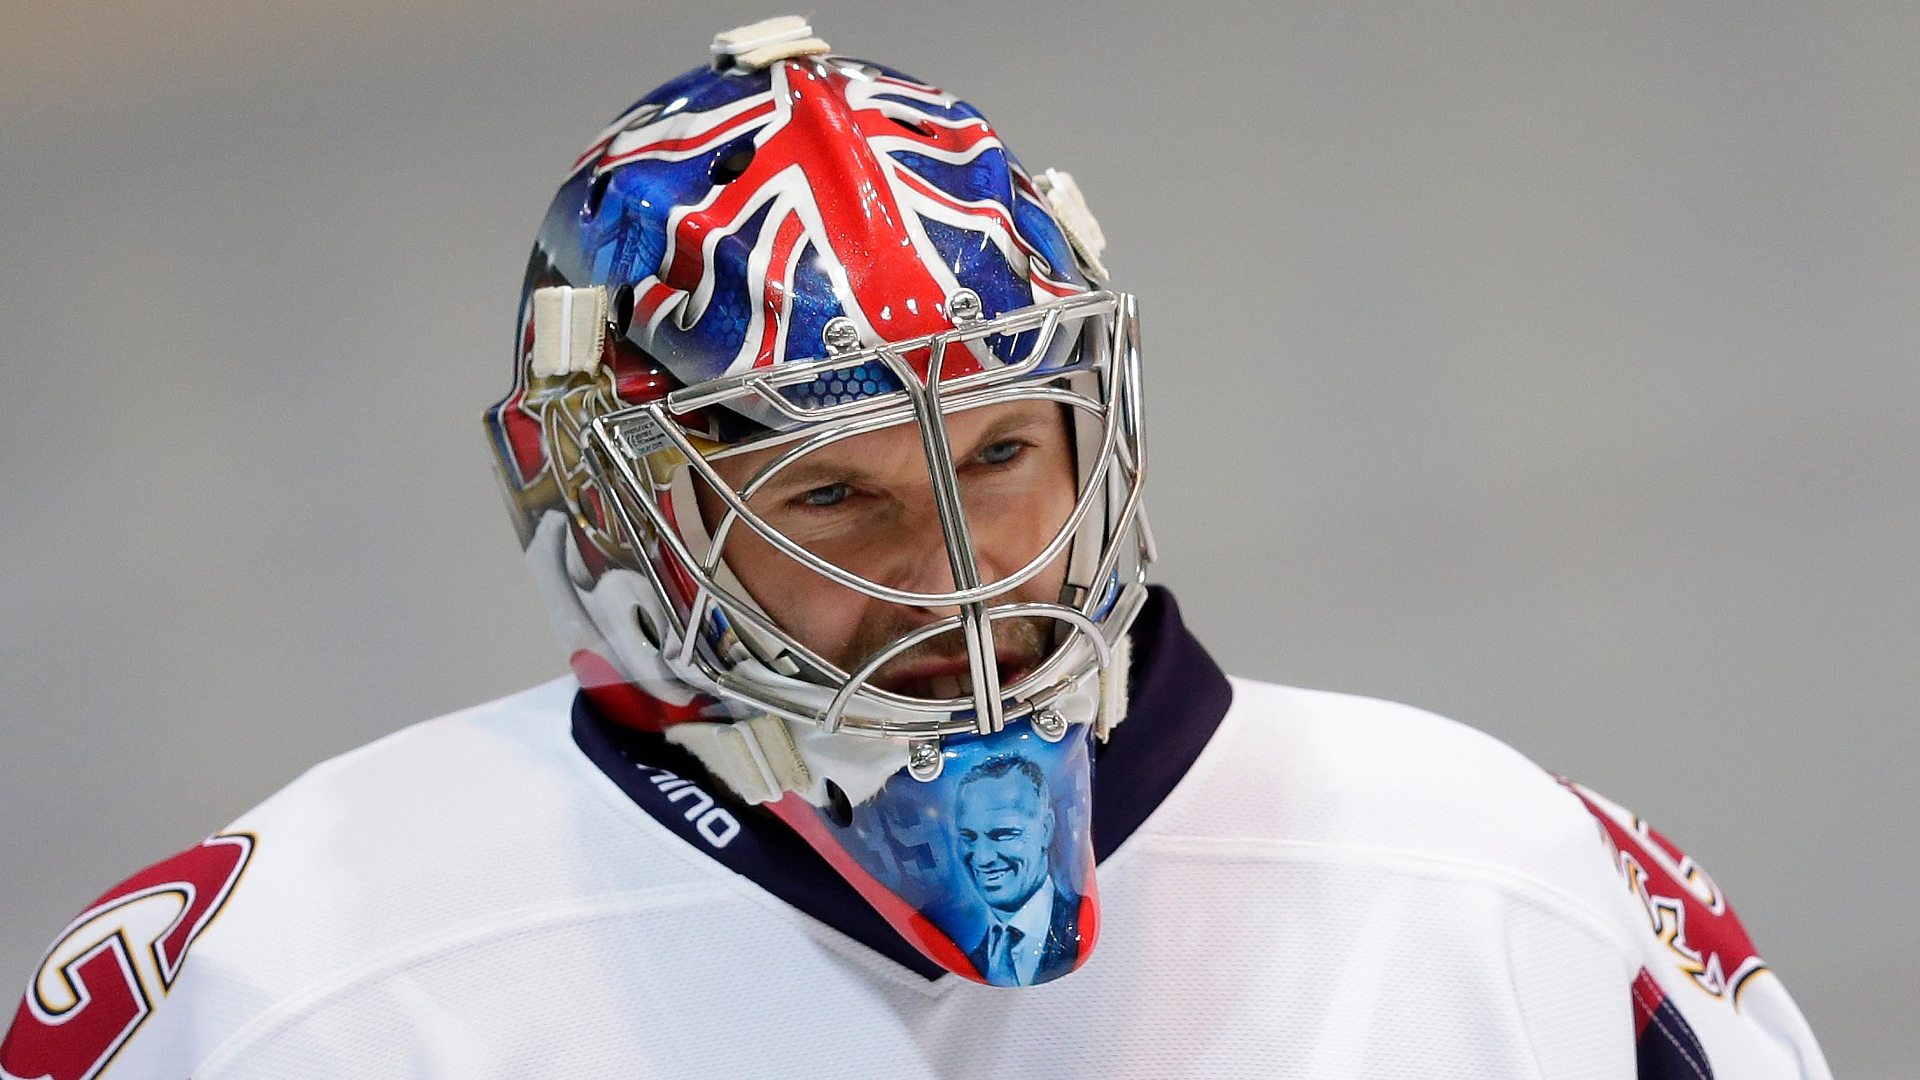 Petr Cech Saved a Penalty to Win a Match on His Ice Hockey Debut